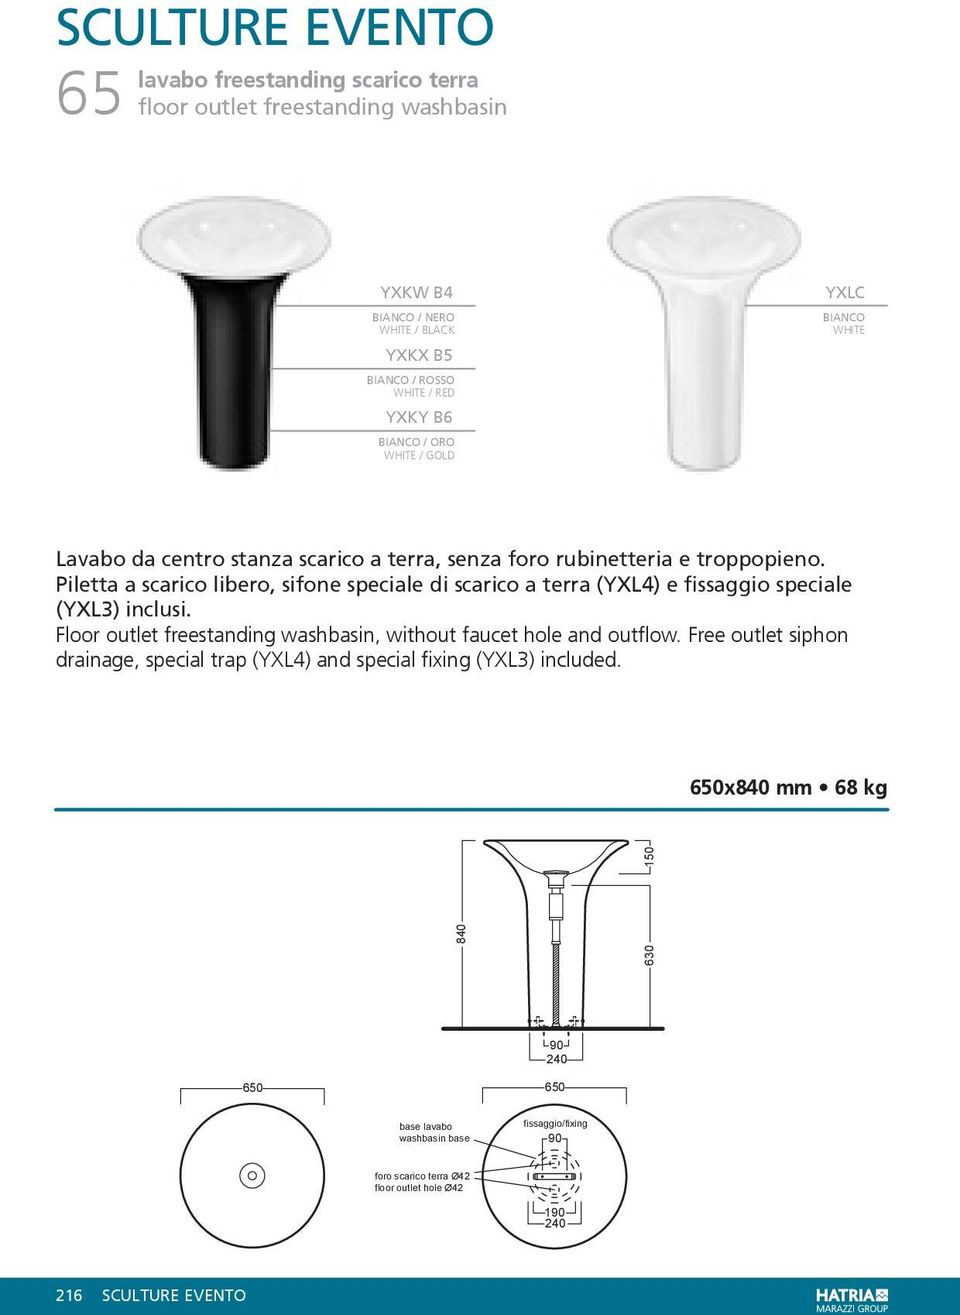 Piletta a scarico libero, sifone speciale di scarico a terra (YXL4) e fissaggio speciale (YXL3) inclusi. Floor outlet freestanding washbasin, without faucet hole and outflow.